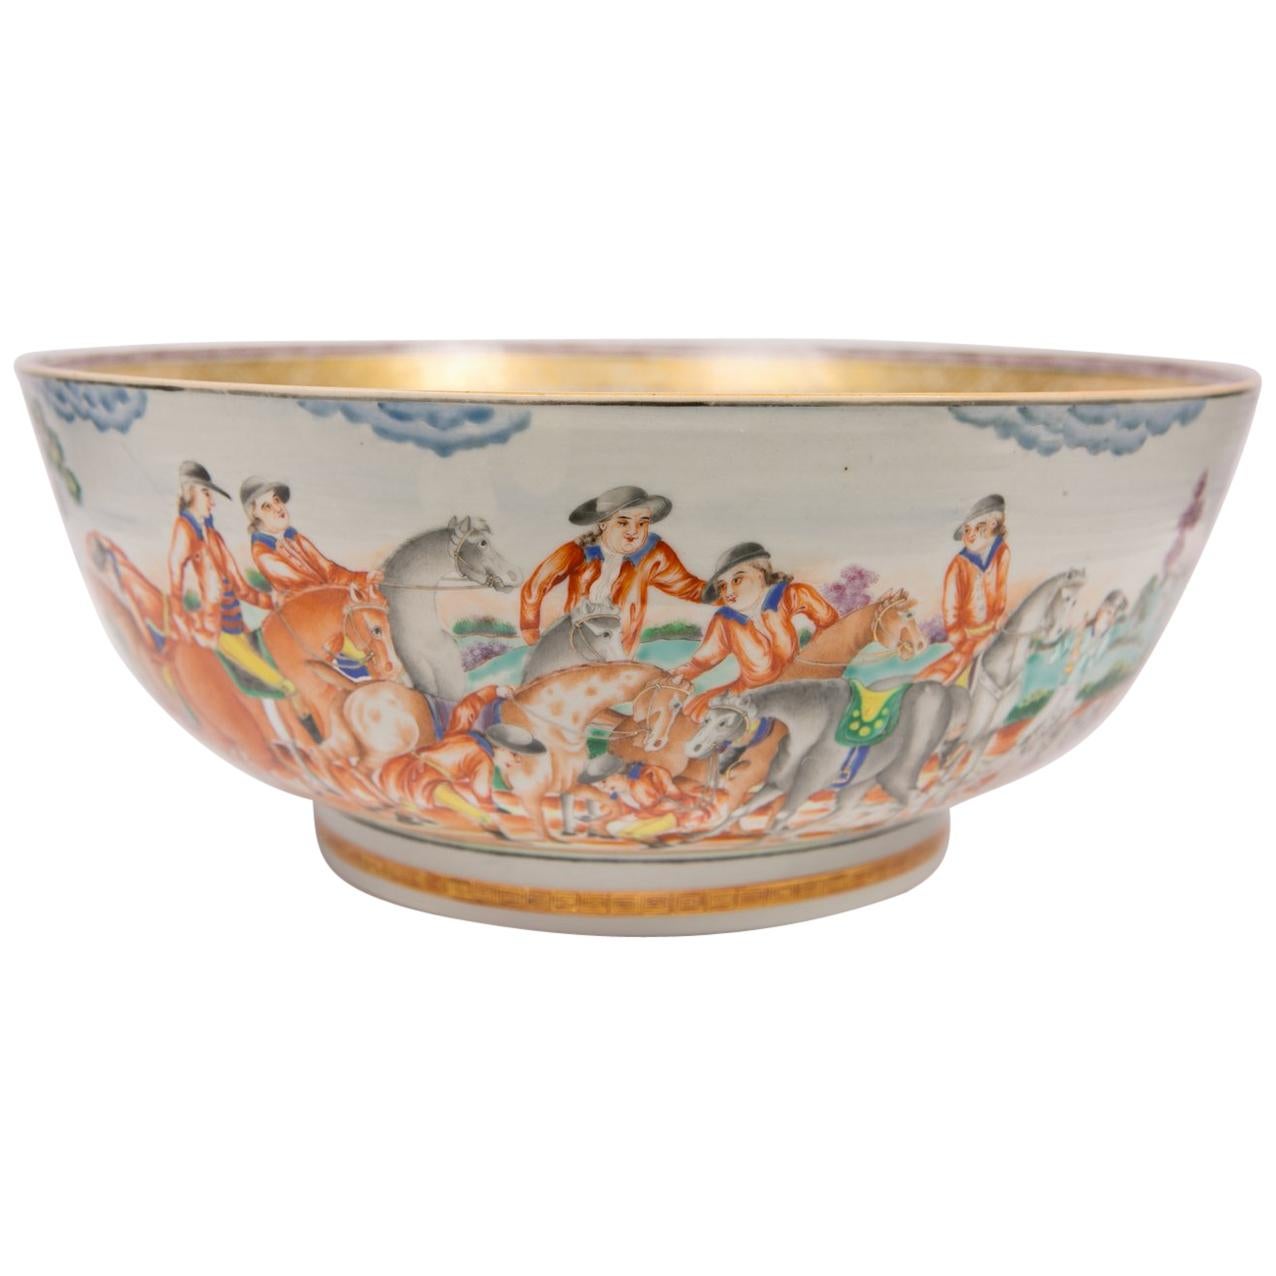 Large Antique 18th century Chinese Porcelain Hunt Bowl Made circa 1770